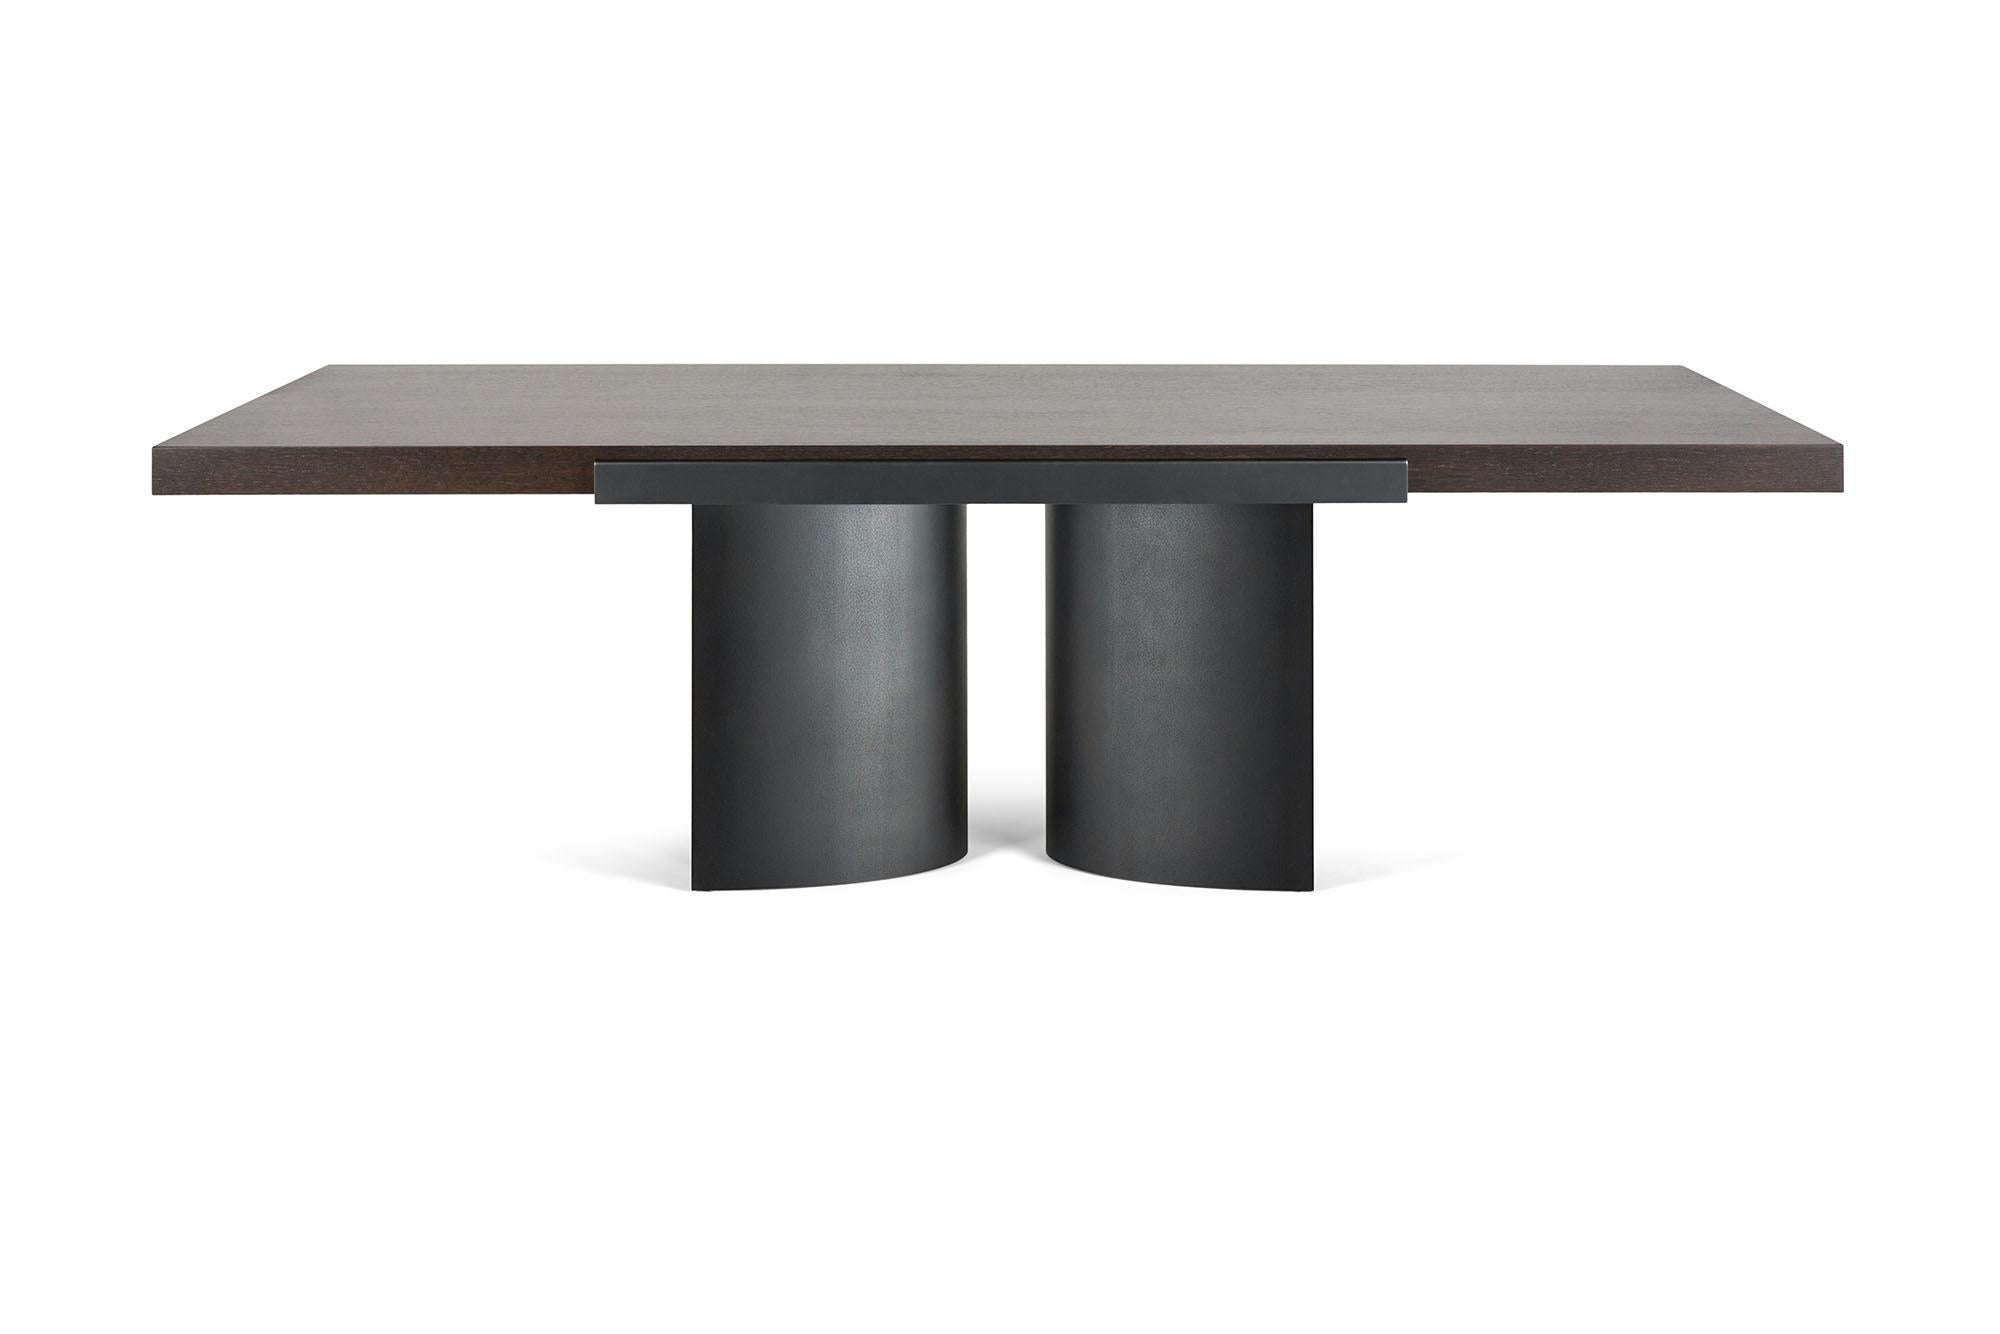 The LUMA design workshop silo grip dining table is the result of thoughtful design and expert craftsmanship. A large slab of fumed oak is gripped and supported by Antique steel bases.

Like all LUMA furniture, this piece is made to order, and can